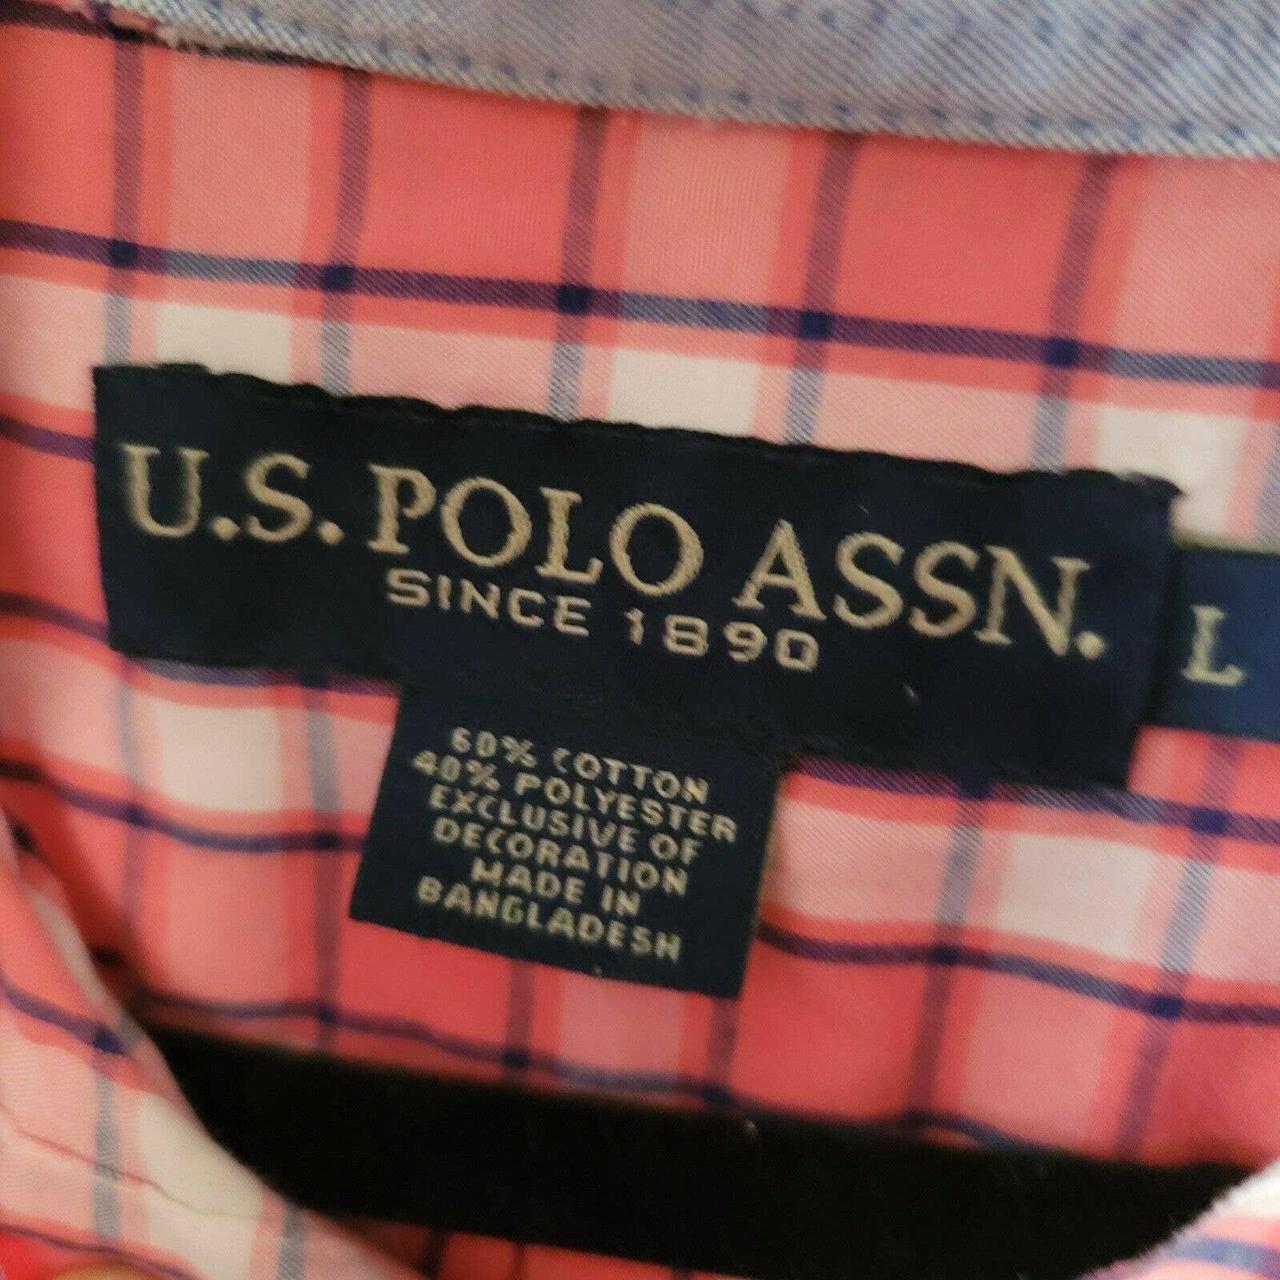 U.S. Polo Assn. Men's Pink and White Shirt (4)